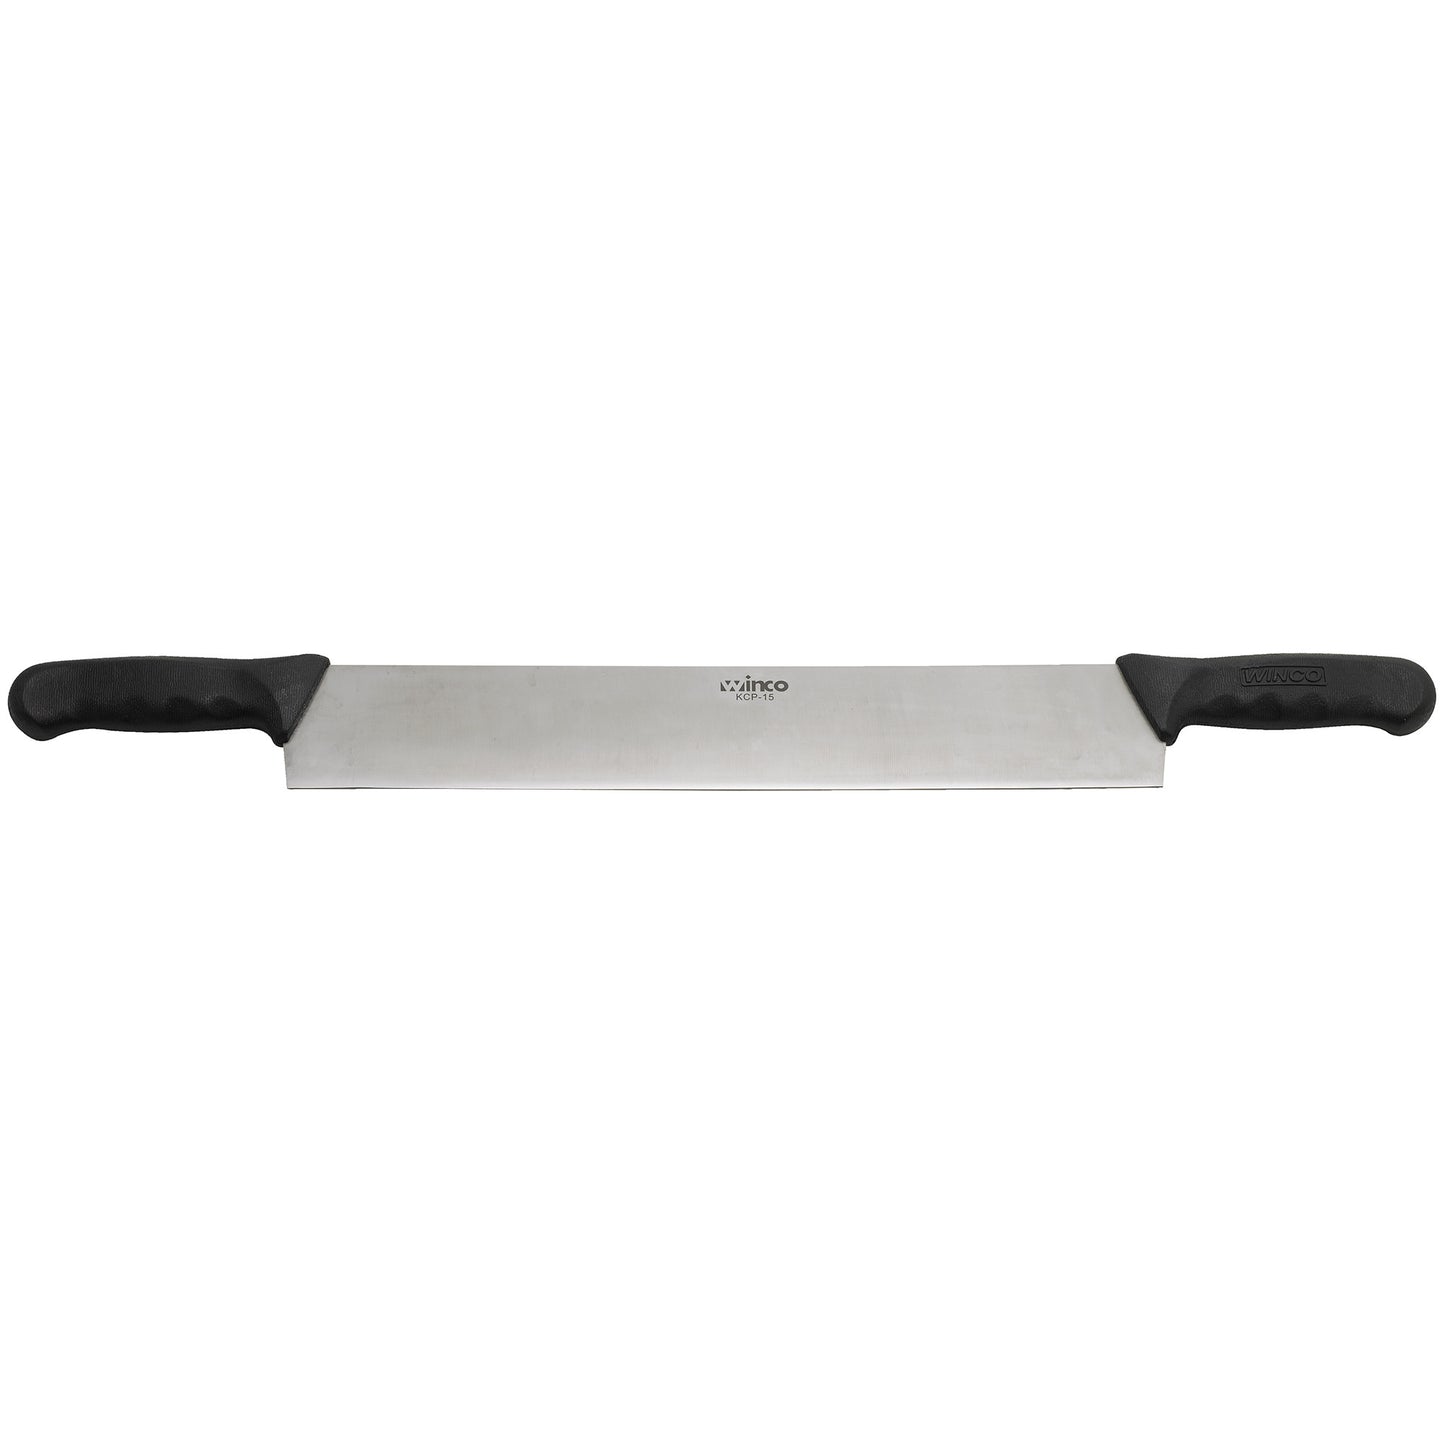 KCP-15 - 15" Double Handle Cheese Knife